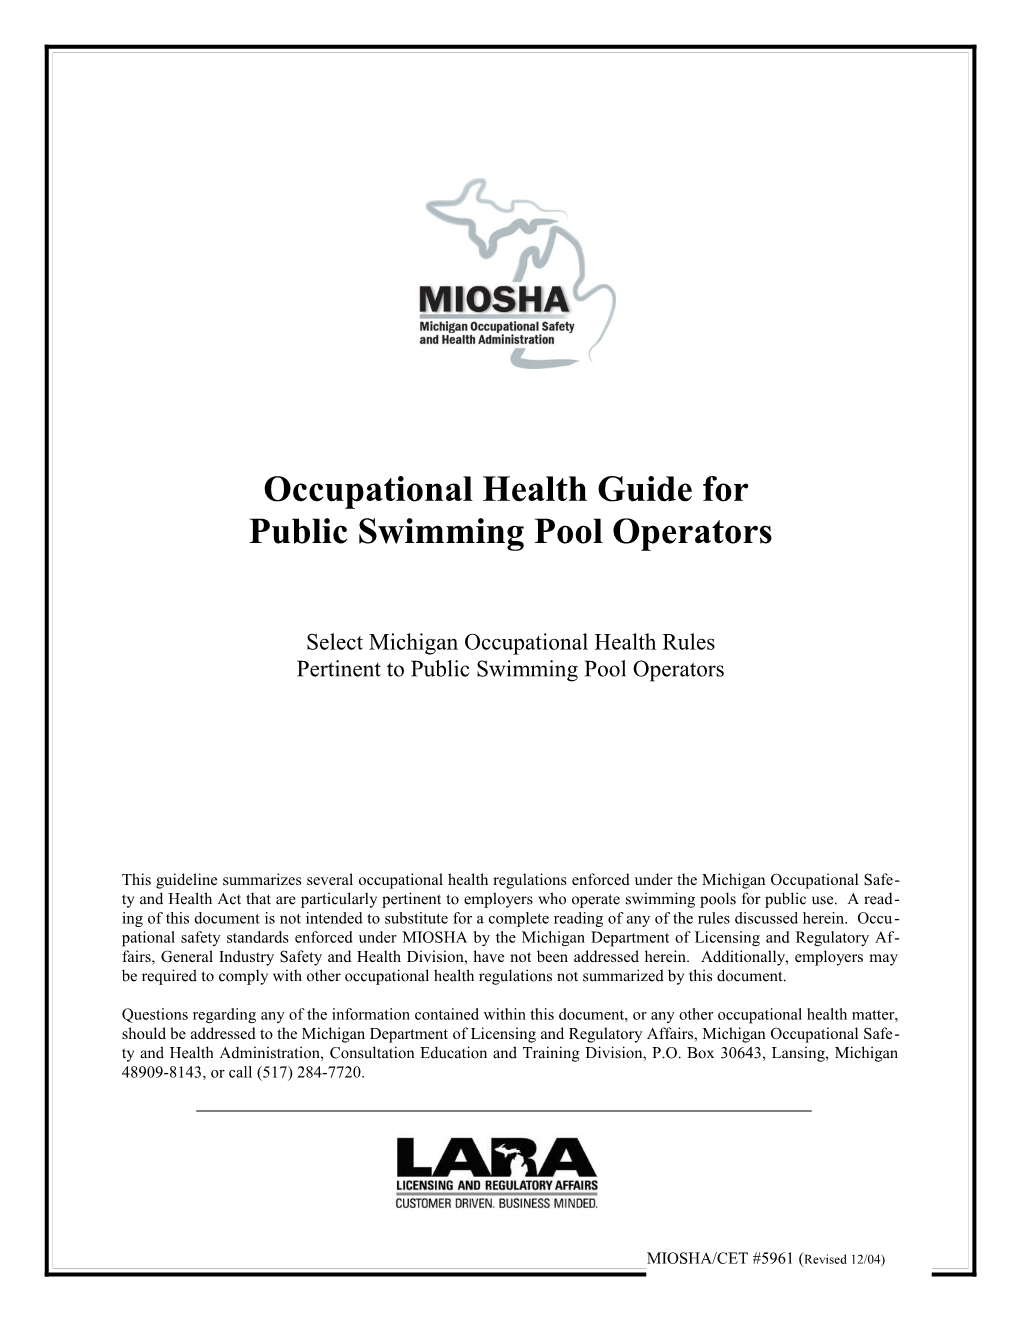 Occupational Health Guide for Public Swimming Pool Operators